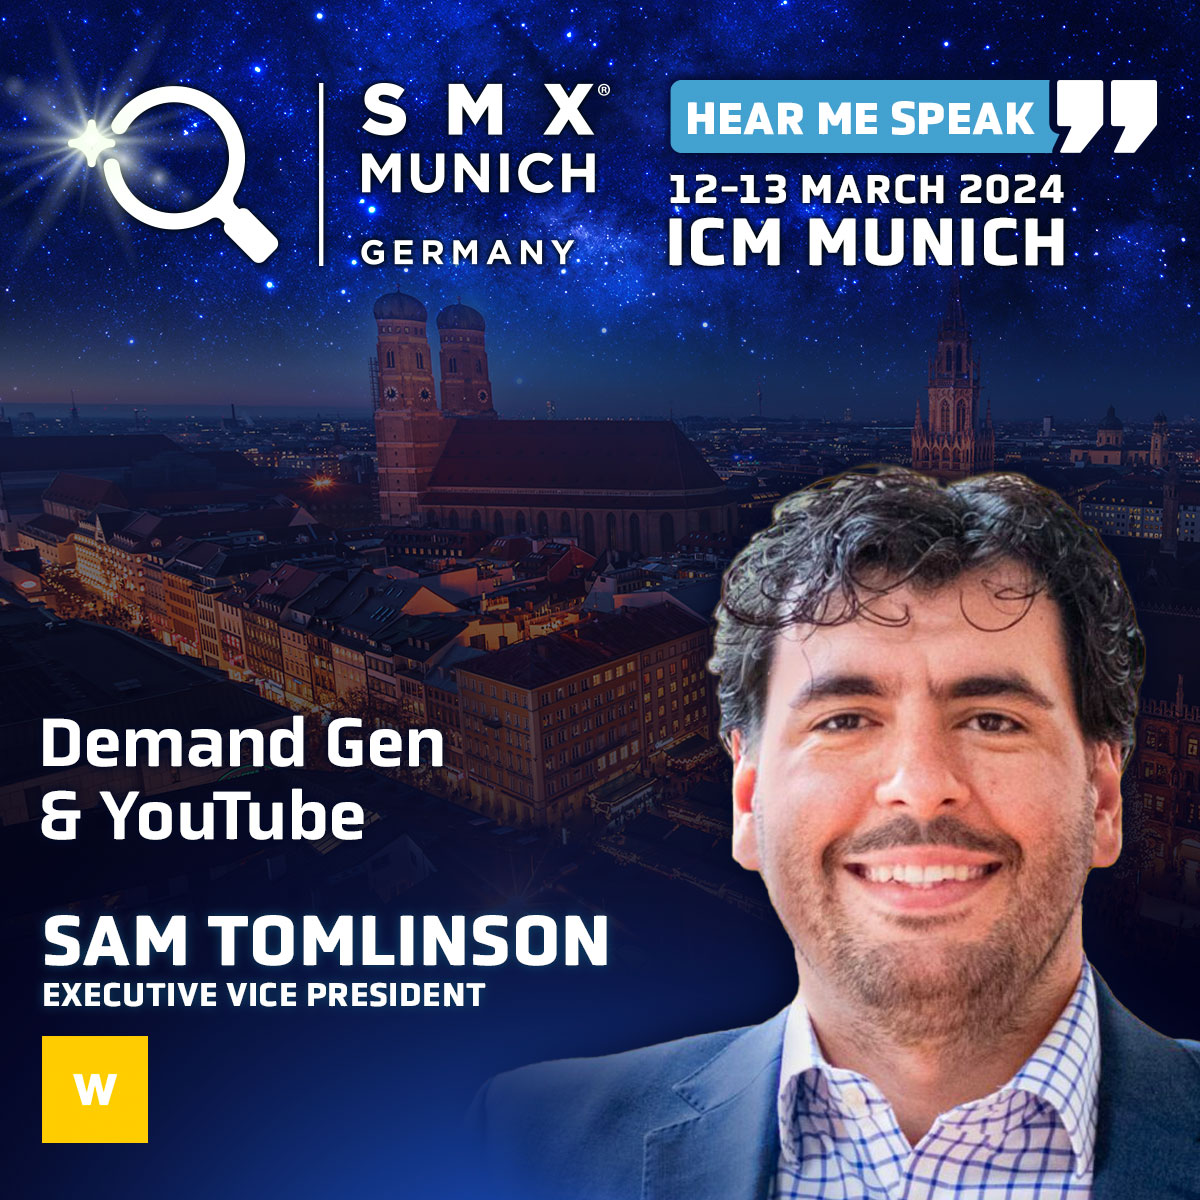 Google's new Demand Generation campaign is creating buzz, but most advertisers haven't tried it yet. Join Sam to learn the basics and how to leverage its exciting features for your ad account. ow.ly/OUK350QzbY5 #smx #google #youtube #ad